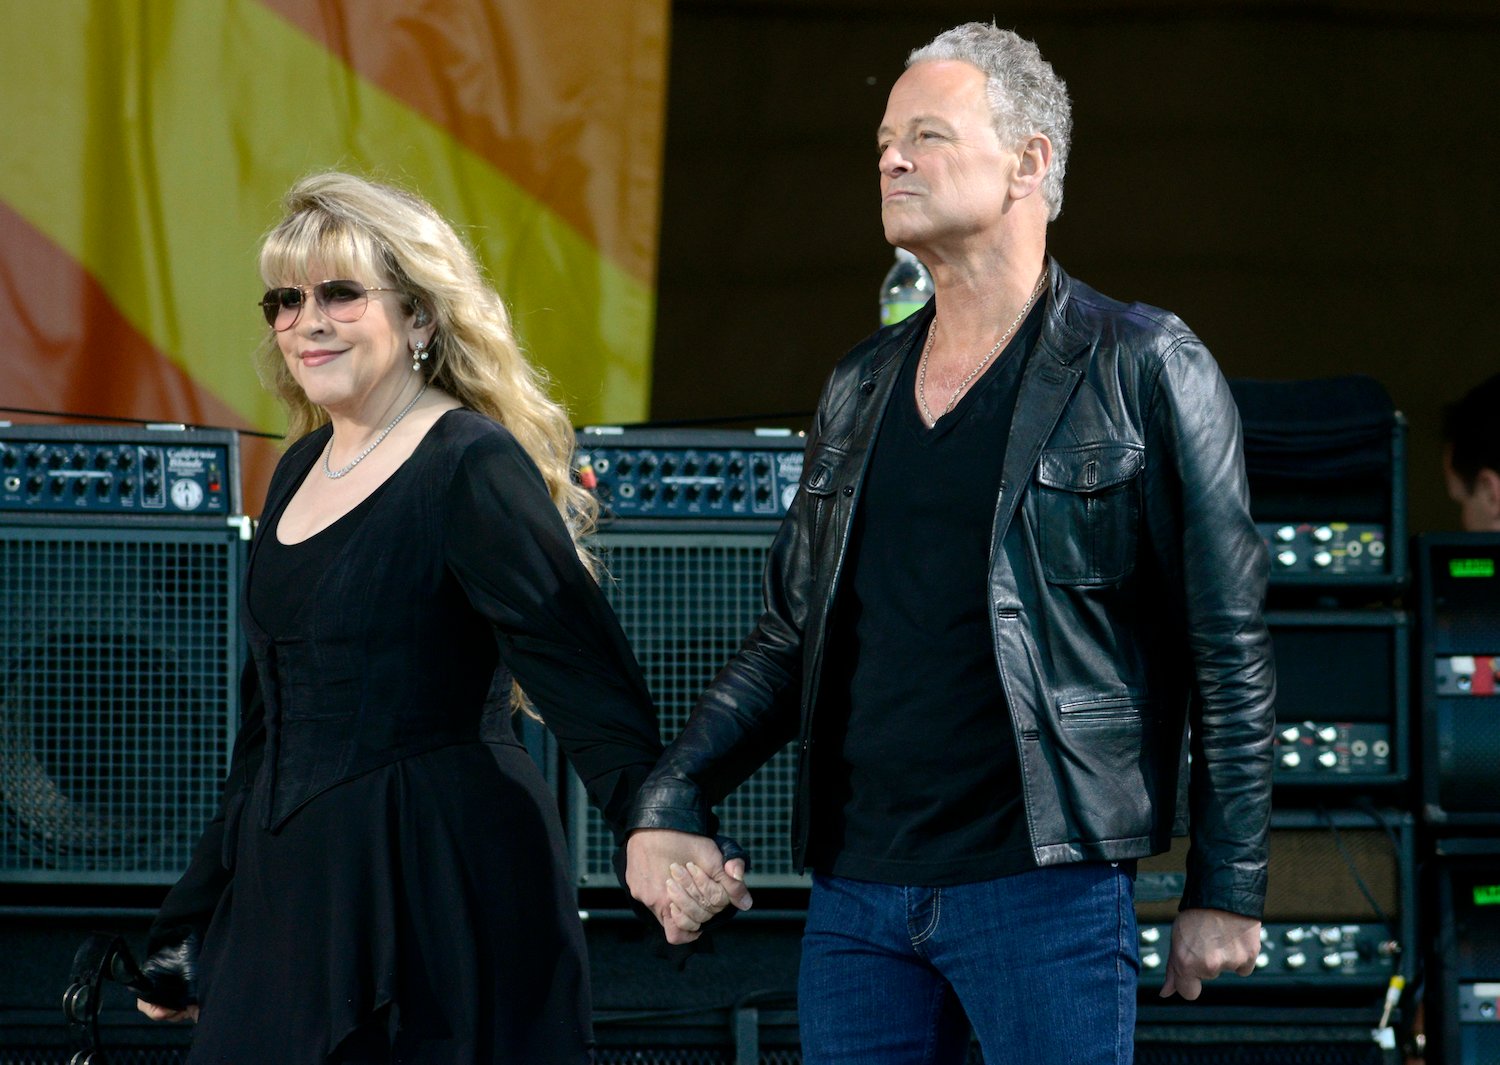 Stevie Nicks and Lindsey Buckingham of Fleetwood Mac perfom at the 2013 New Orleans Jazz & Heritage Festival at Fair Grounds Race Course